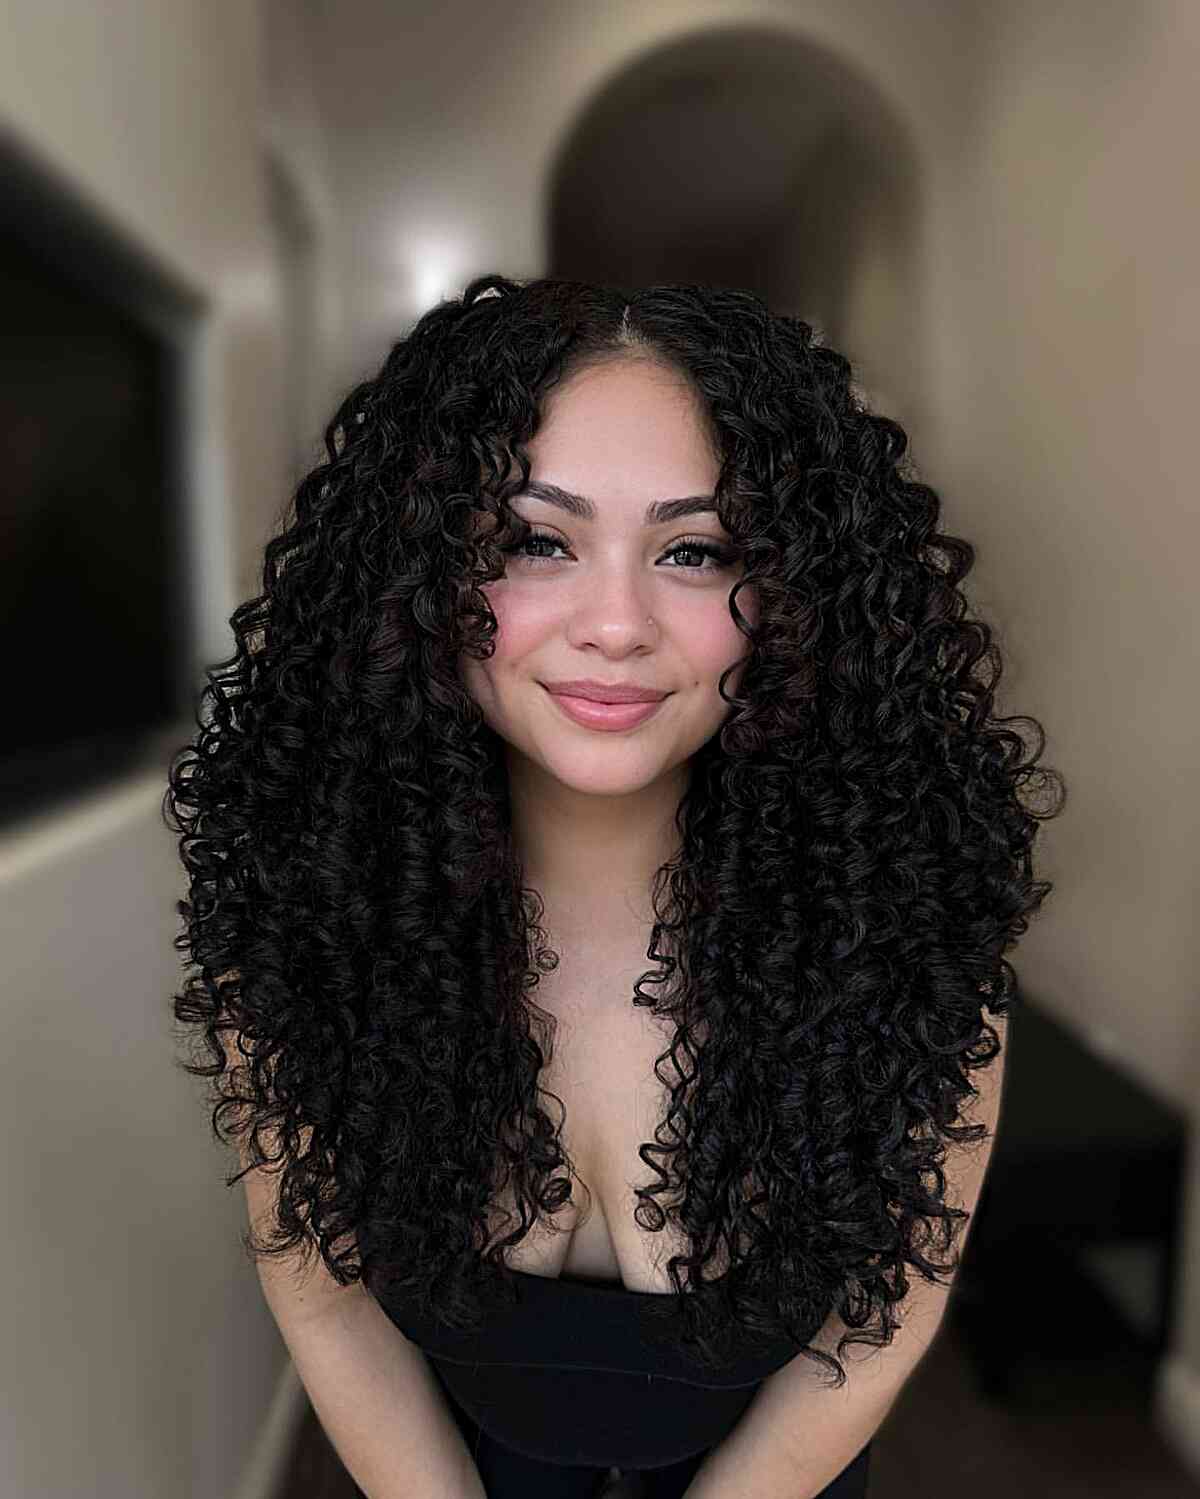 A woman with a Cadō cut that features long layers and defined curls, creating a glamorous yet practical style for natural curls.